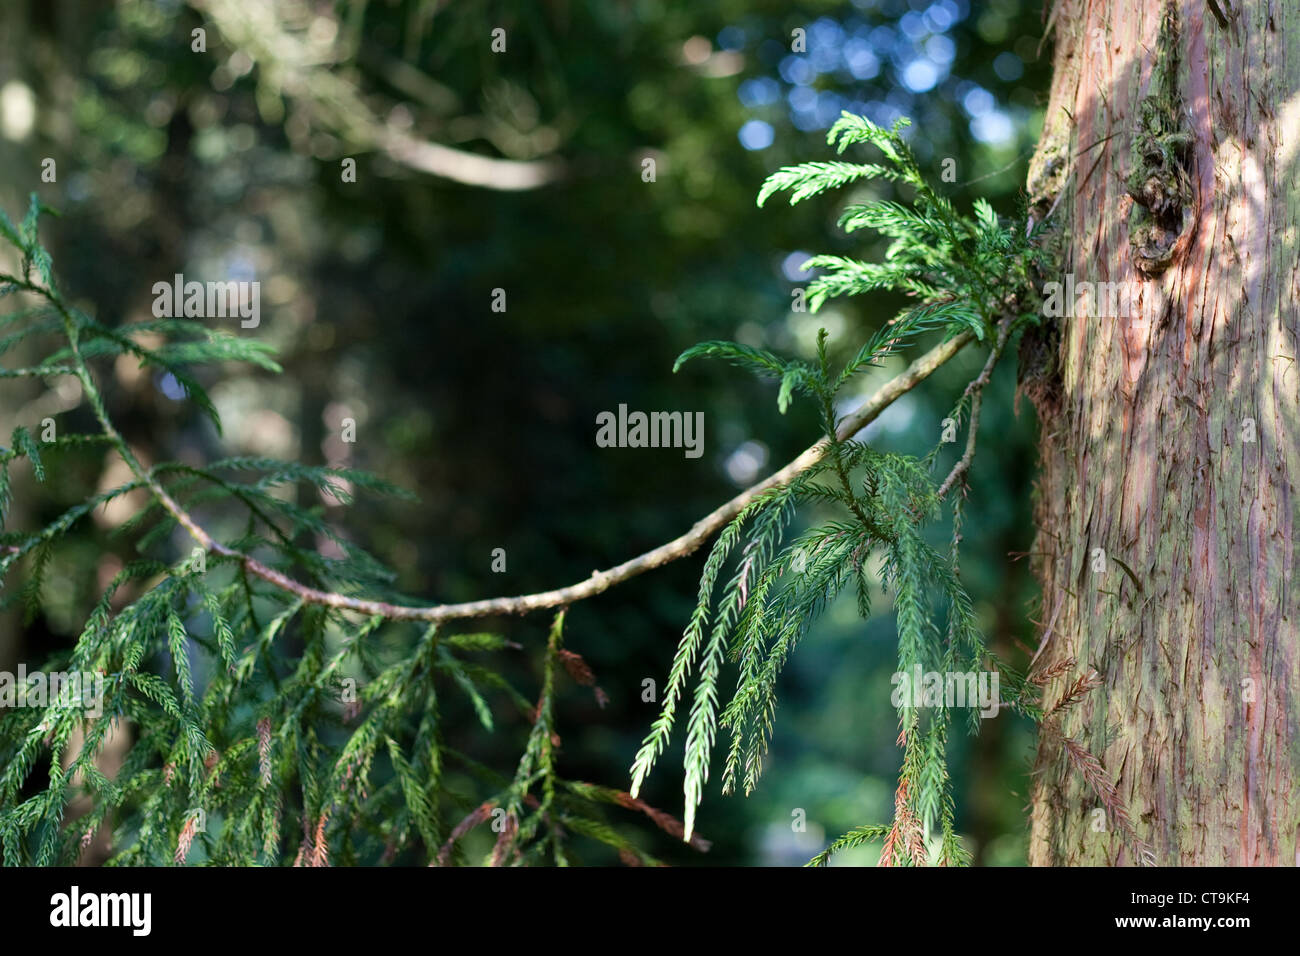 Japanese cedar, Cryptomeria japonica, tree with a sideshoot growing out of the trunk Stock Photo